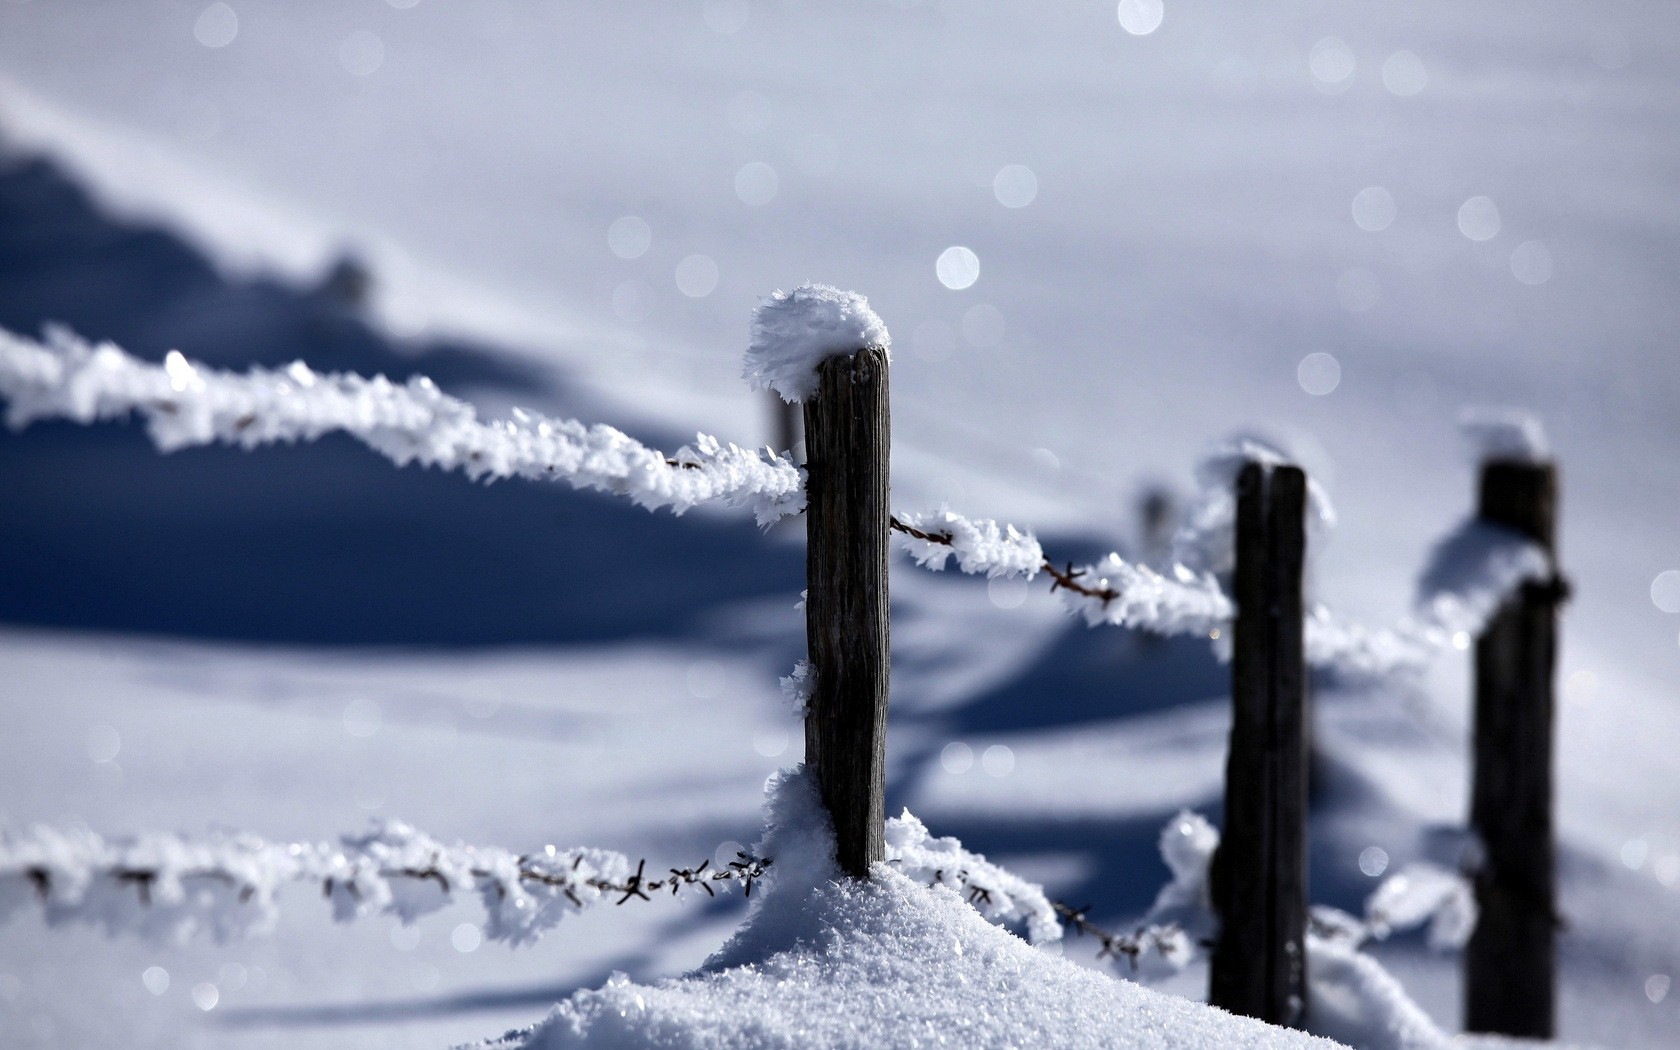 photography, winter, barb wire, fence, snow